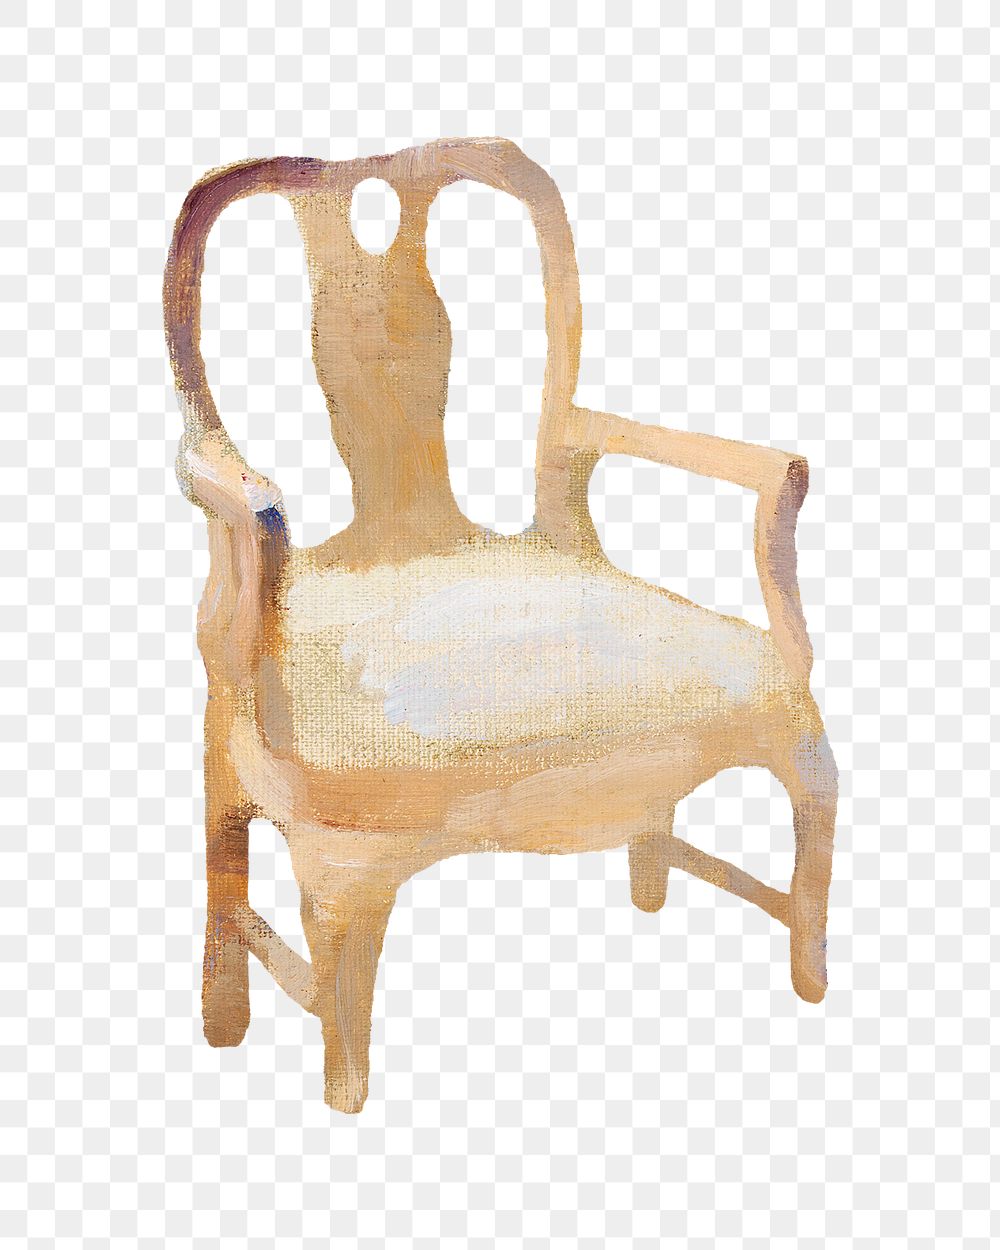 Vintage chair png illustration by Maria Wiik, transparent background. Remixed by rawpixel.